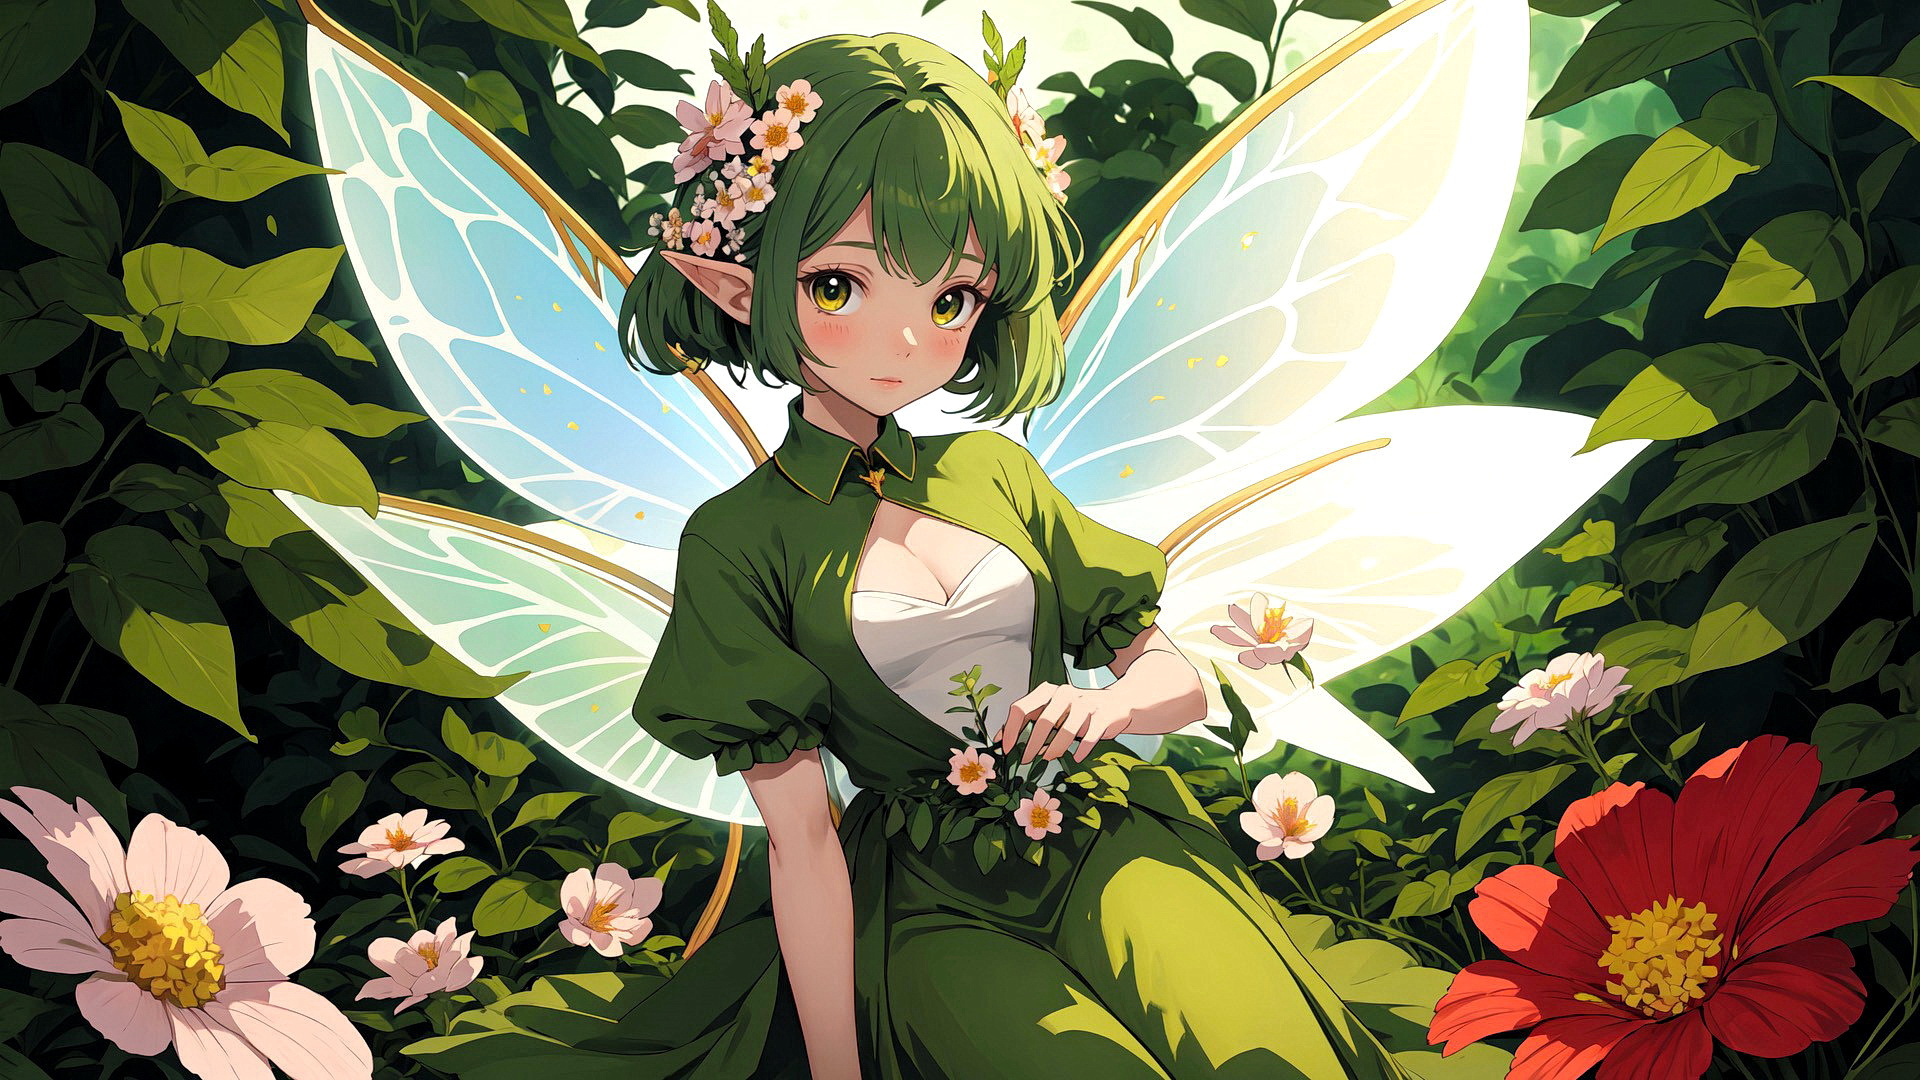 Drawing of a fairy in a green dress sitting against a background of leaves